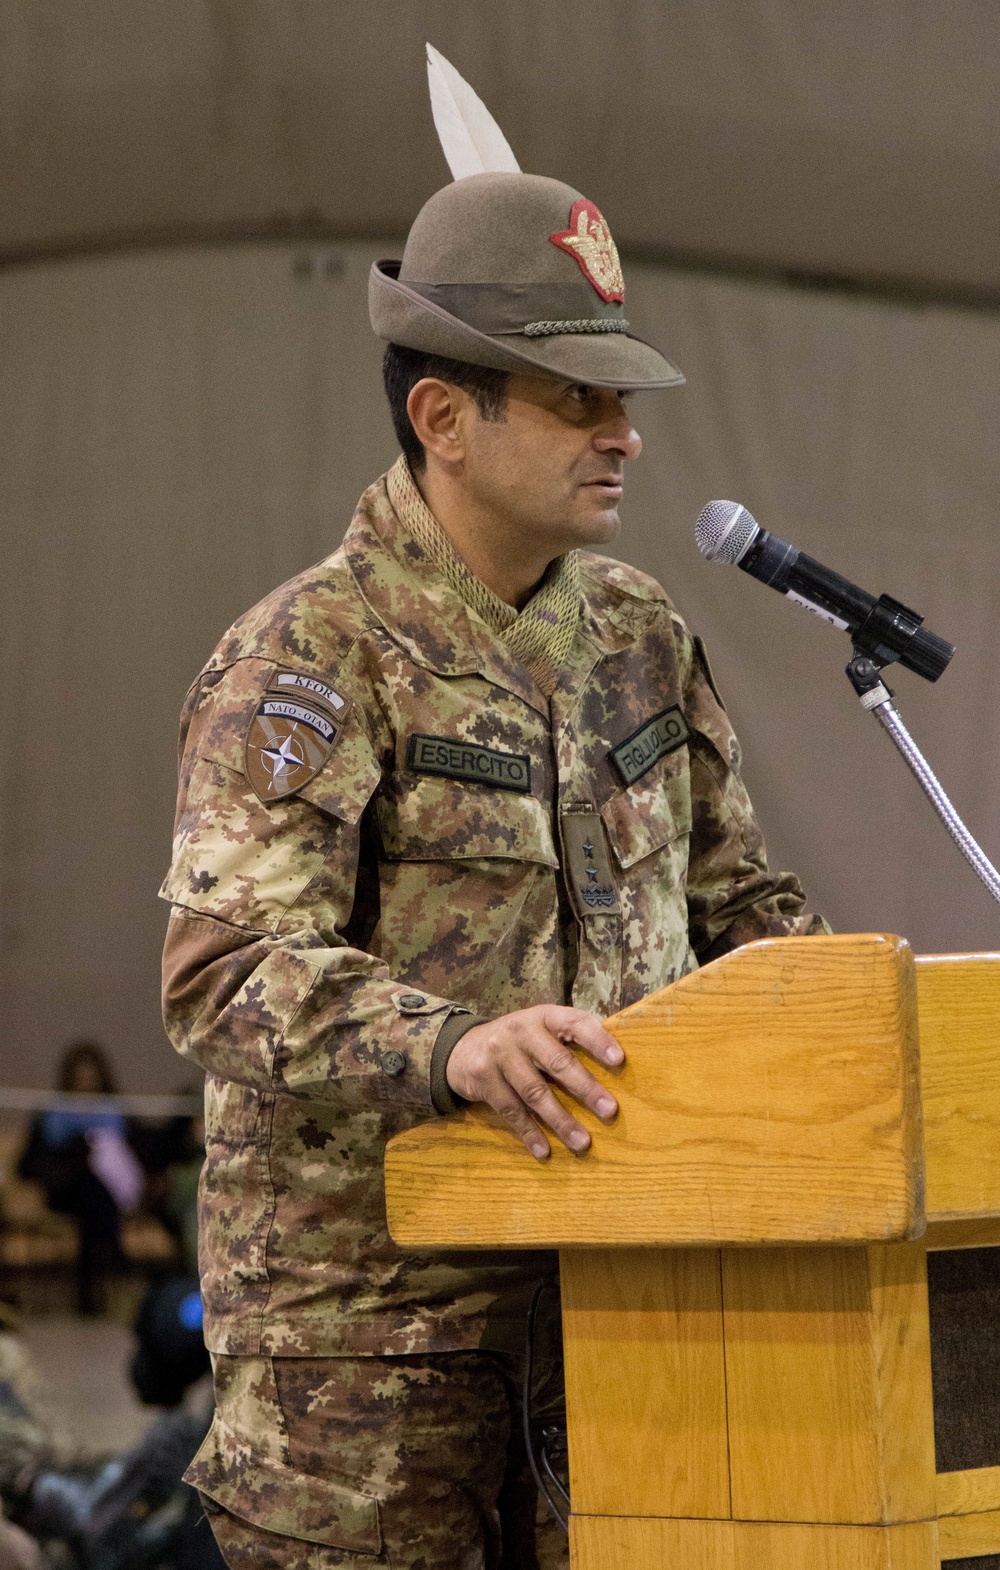 Kosovo Force 19 begins their mission